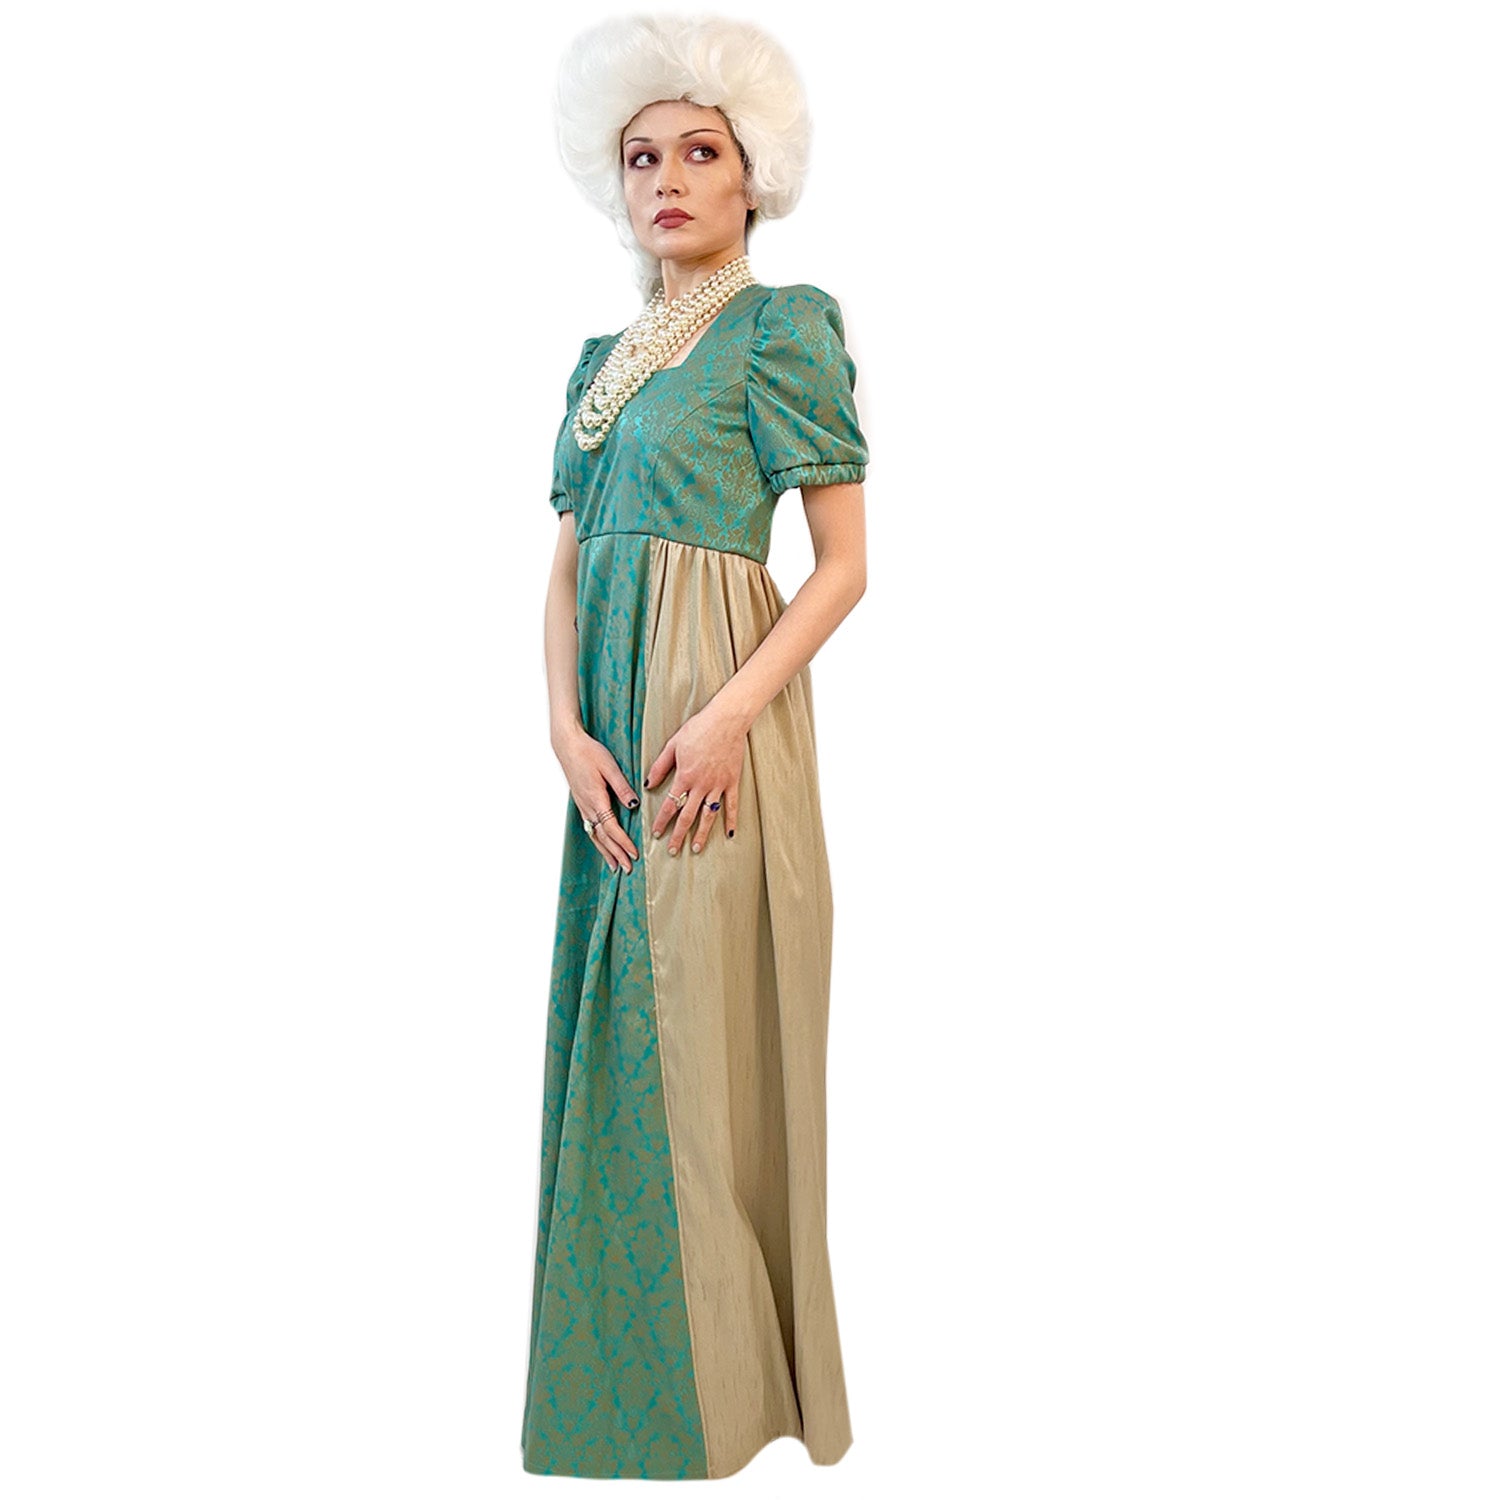 Regency Gold And Green Square Neck Women's Dress Adult Costume